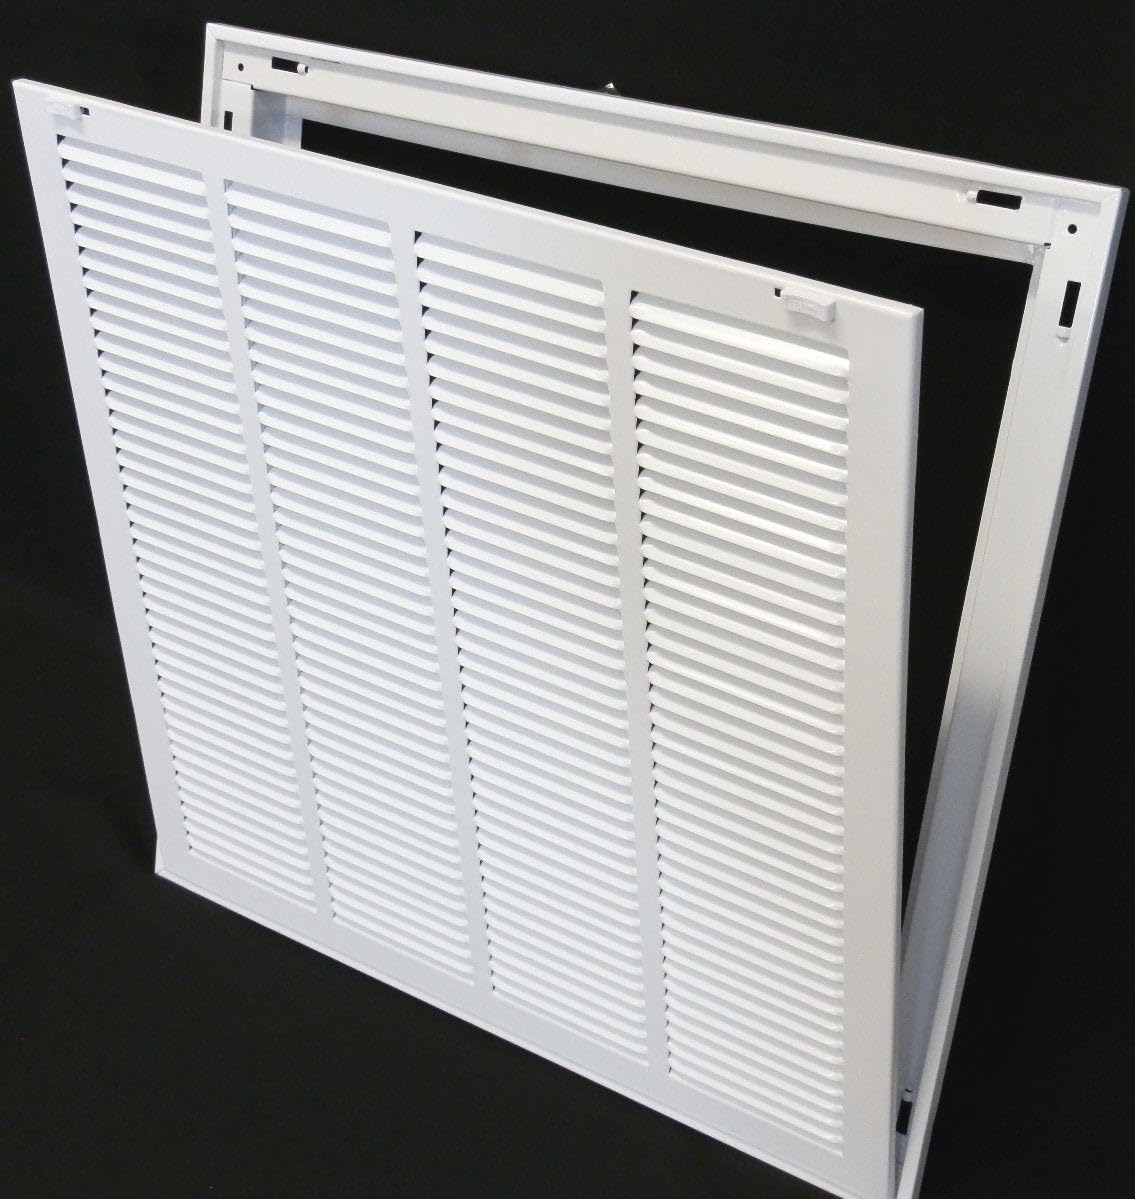 24&quot; X 6&quot; Steel Return Air Filter Grille for 1&quot; Filter - Removable Frame - [Outer Dimensions: 26 5/8&quot; X 8 5/8&quot;]